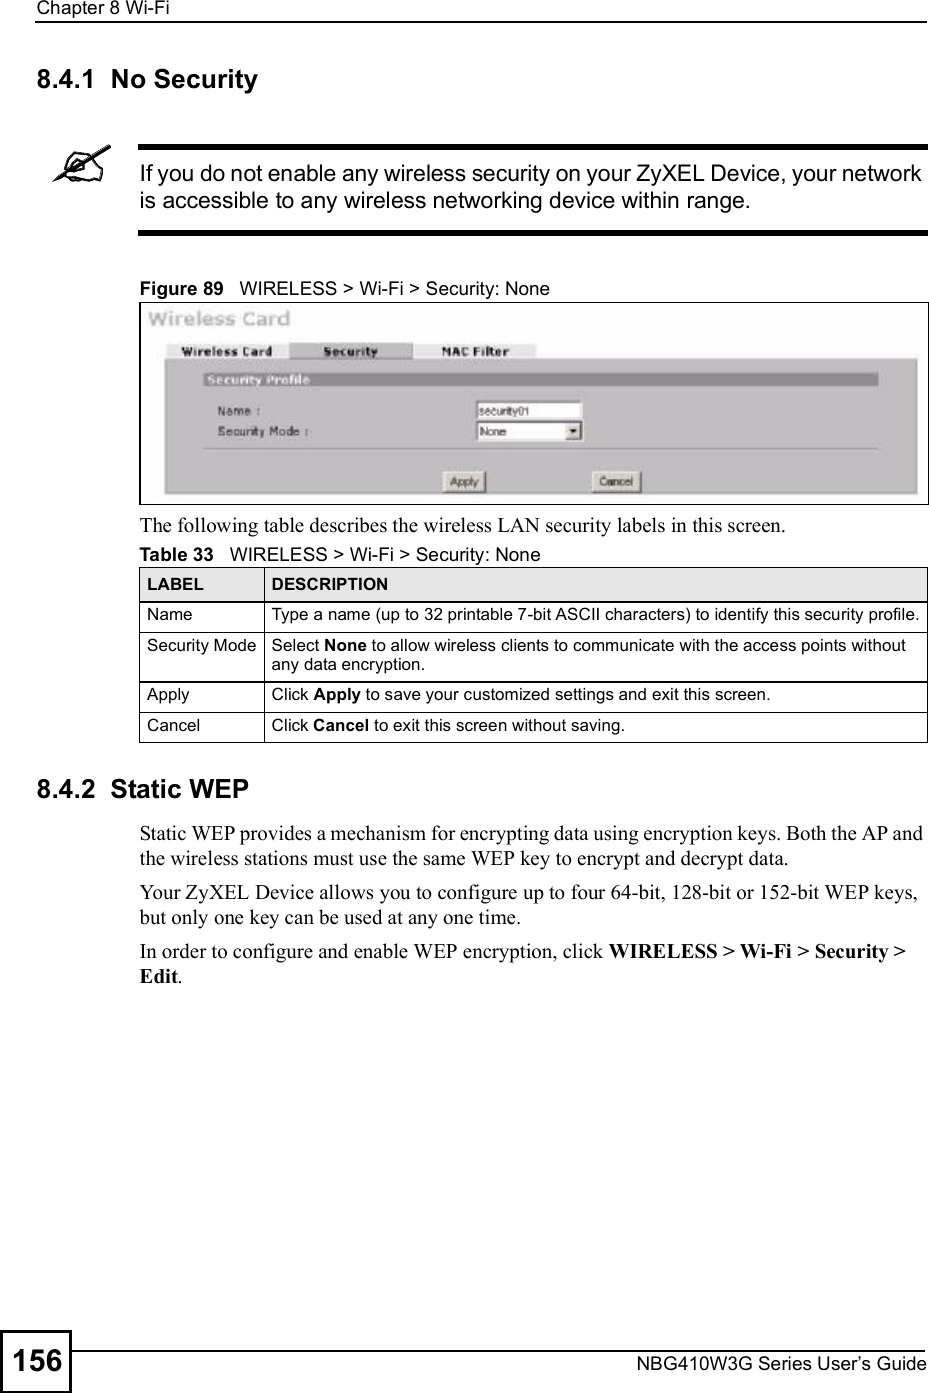 Chapter 8Wi-FiNBG410W3G Series User s Guide1568.4.1  No SecurityIf you do not enable any wireless security on your ZyXEL Device, your network is accessible to any wireless networking device within range.Figure 89   WIRELESS &gt; Wi-Fi &gt; Security: NoneThe following table describes the wireless LAN security labels in this screen.8.4.2  Static WEPStatic WEP provides a mechanism for encrypting data using encryption keys. Both the AP and the wireless stations must use the same WEP key to encrypt and decrypt data. Your ZyXEL Device allows you to configure up to four 64-bit, 128-bit or 152-bit WEP keys, but only one key can be used at any one time. In order to configure and enable WEP encryption, click WIRELESS &gt; Wi-Fi &gt; Security &gt; Edit. Table 33   WIRELESS &gt; Wi-Fi &gt; Security: None LABEL DESCRIPTIONName Type a name (up to 32 printable 7-bit ASCII characters) to identify this security profile.Security ModeSelect None to allow wireless clients to communicate with the access points without any data encryption.ApplyClick Apply to save your customized settings and exit this screen.CancelClick Cancel to exit this screen without saving.